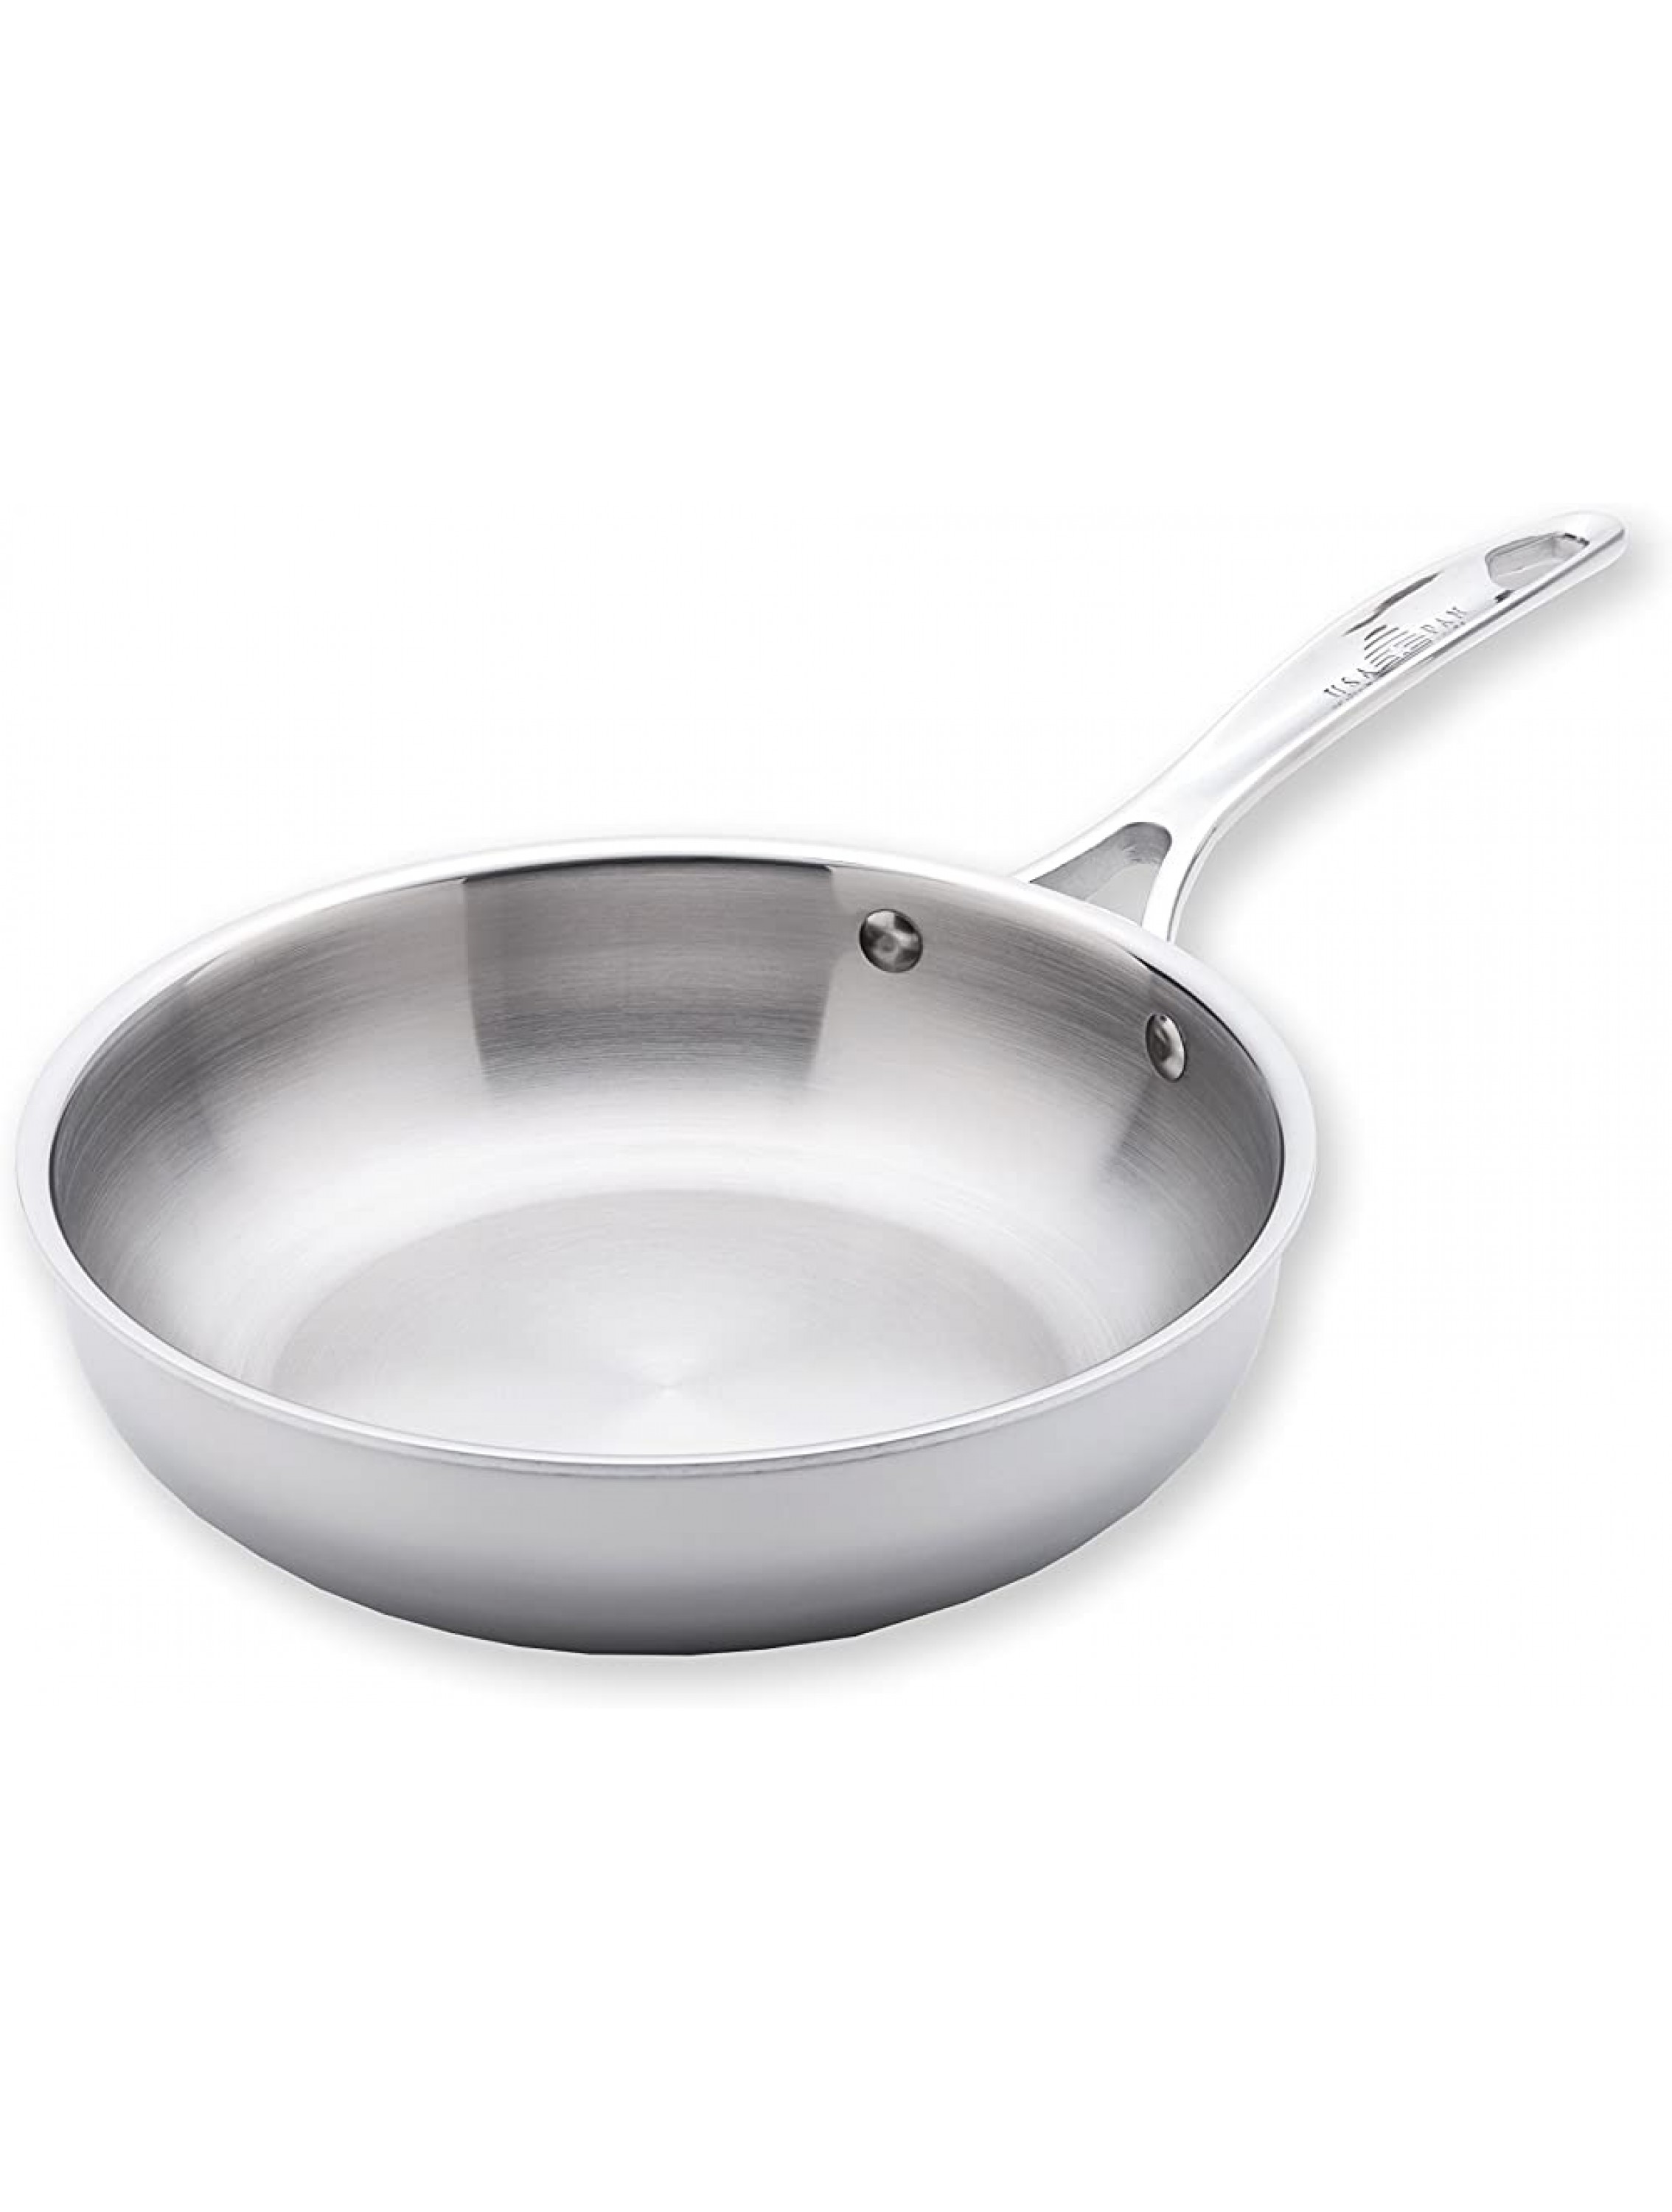 USA Pan Cookware 5-Ply Stainless Steel 8 Inch Sauté Skillet Oven and Dishwasher Safe Made in the USA - BZ2NFY30V